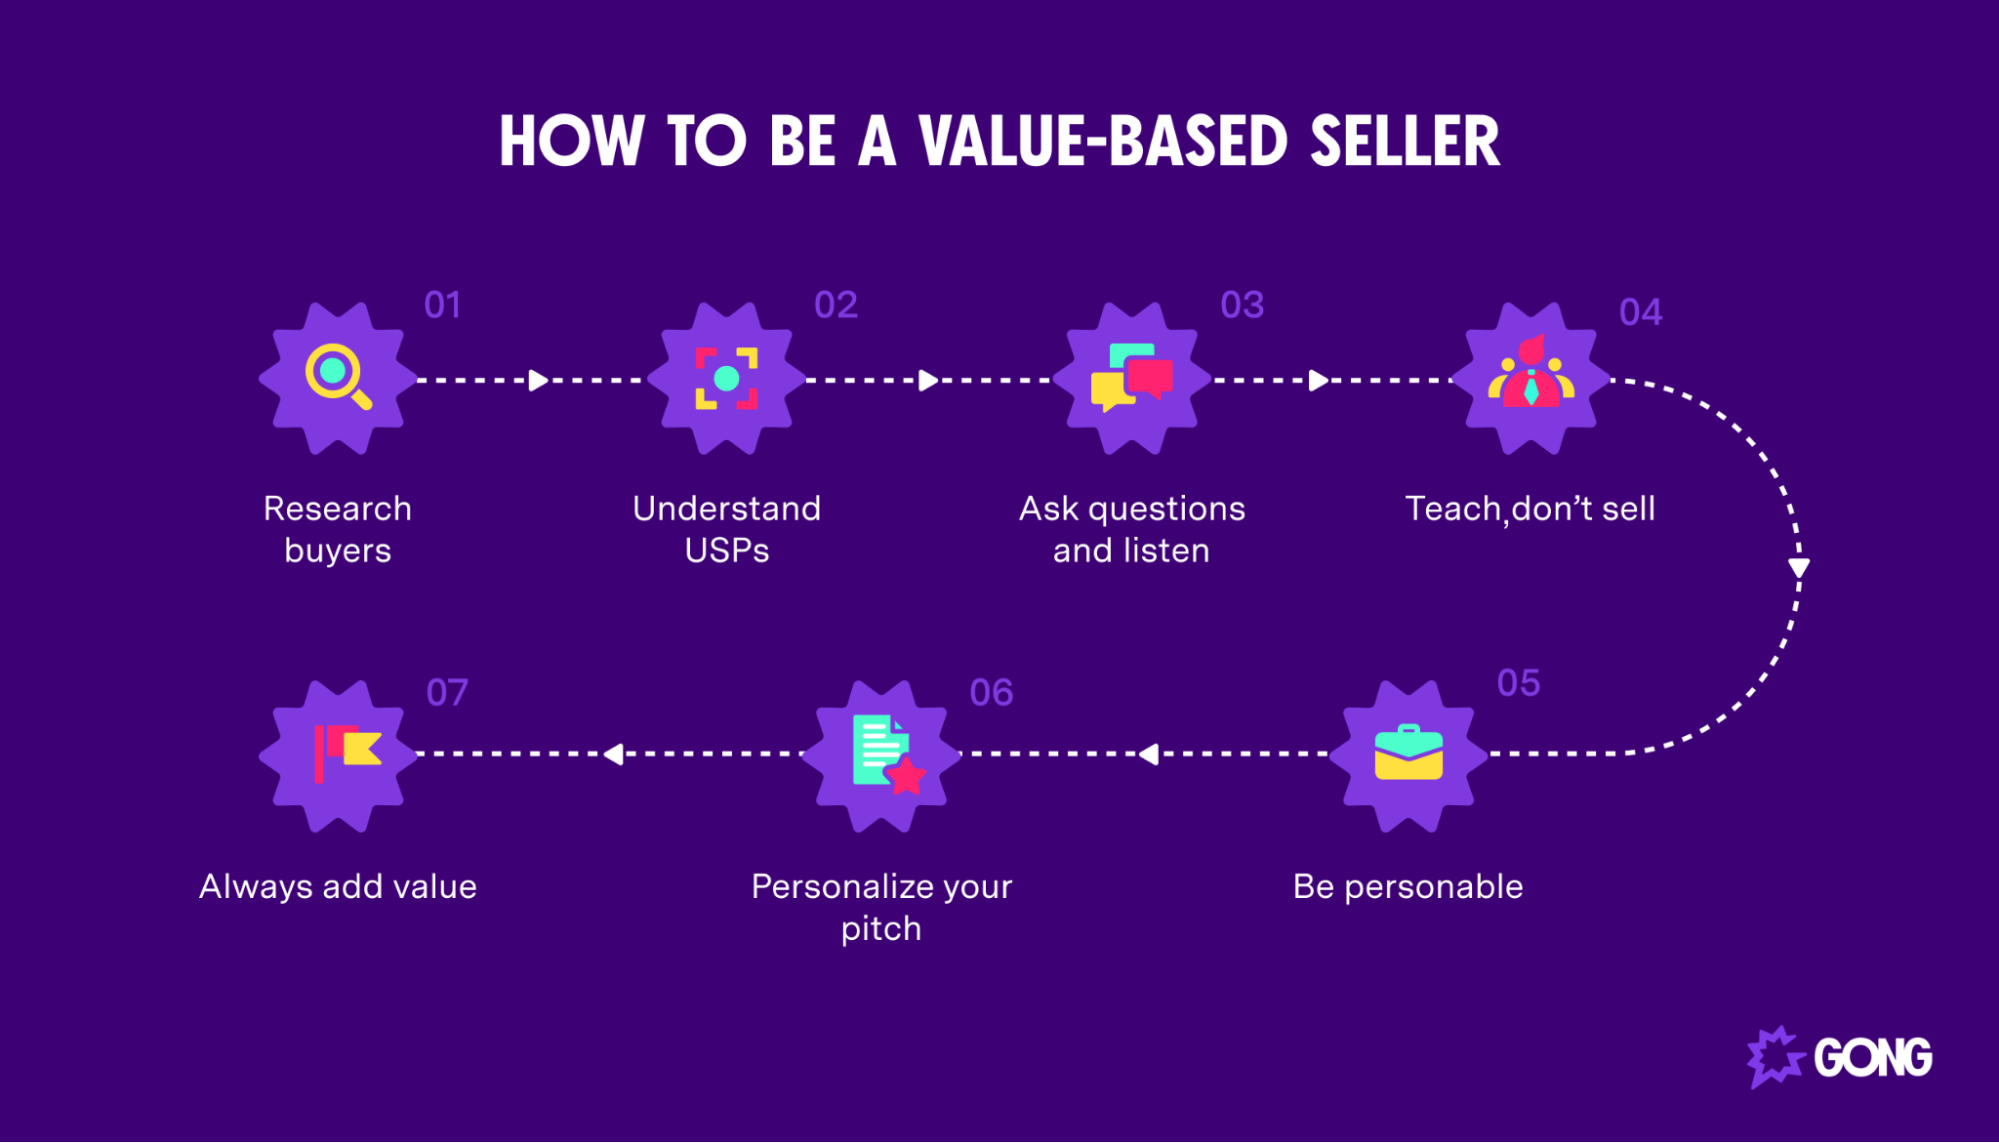 Become a value-based seller in 7 steps